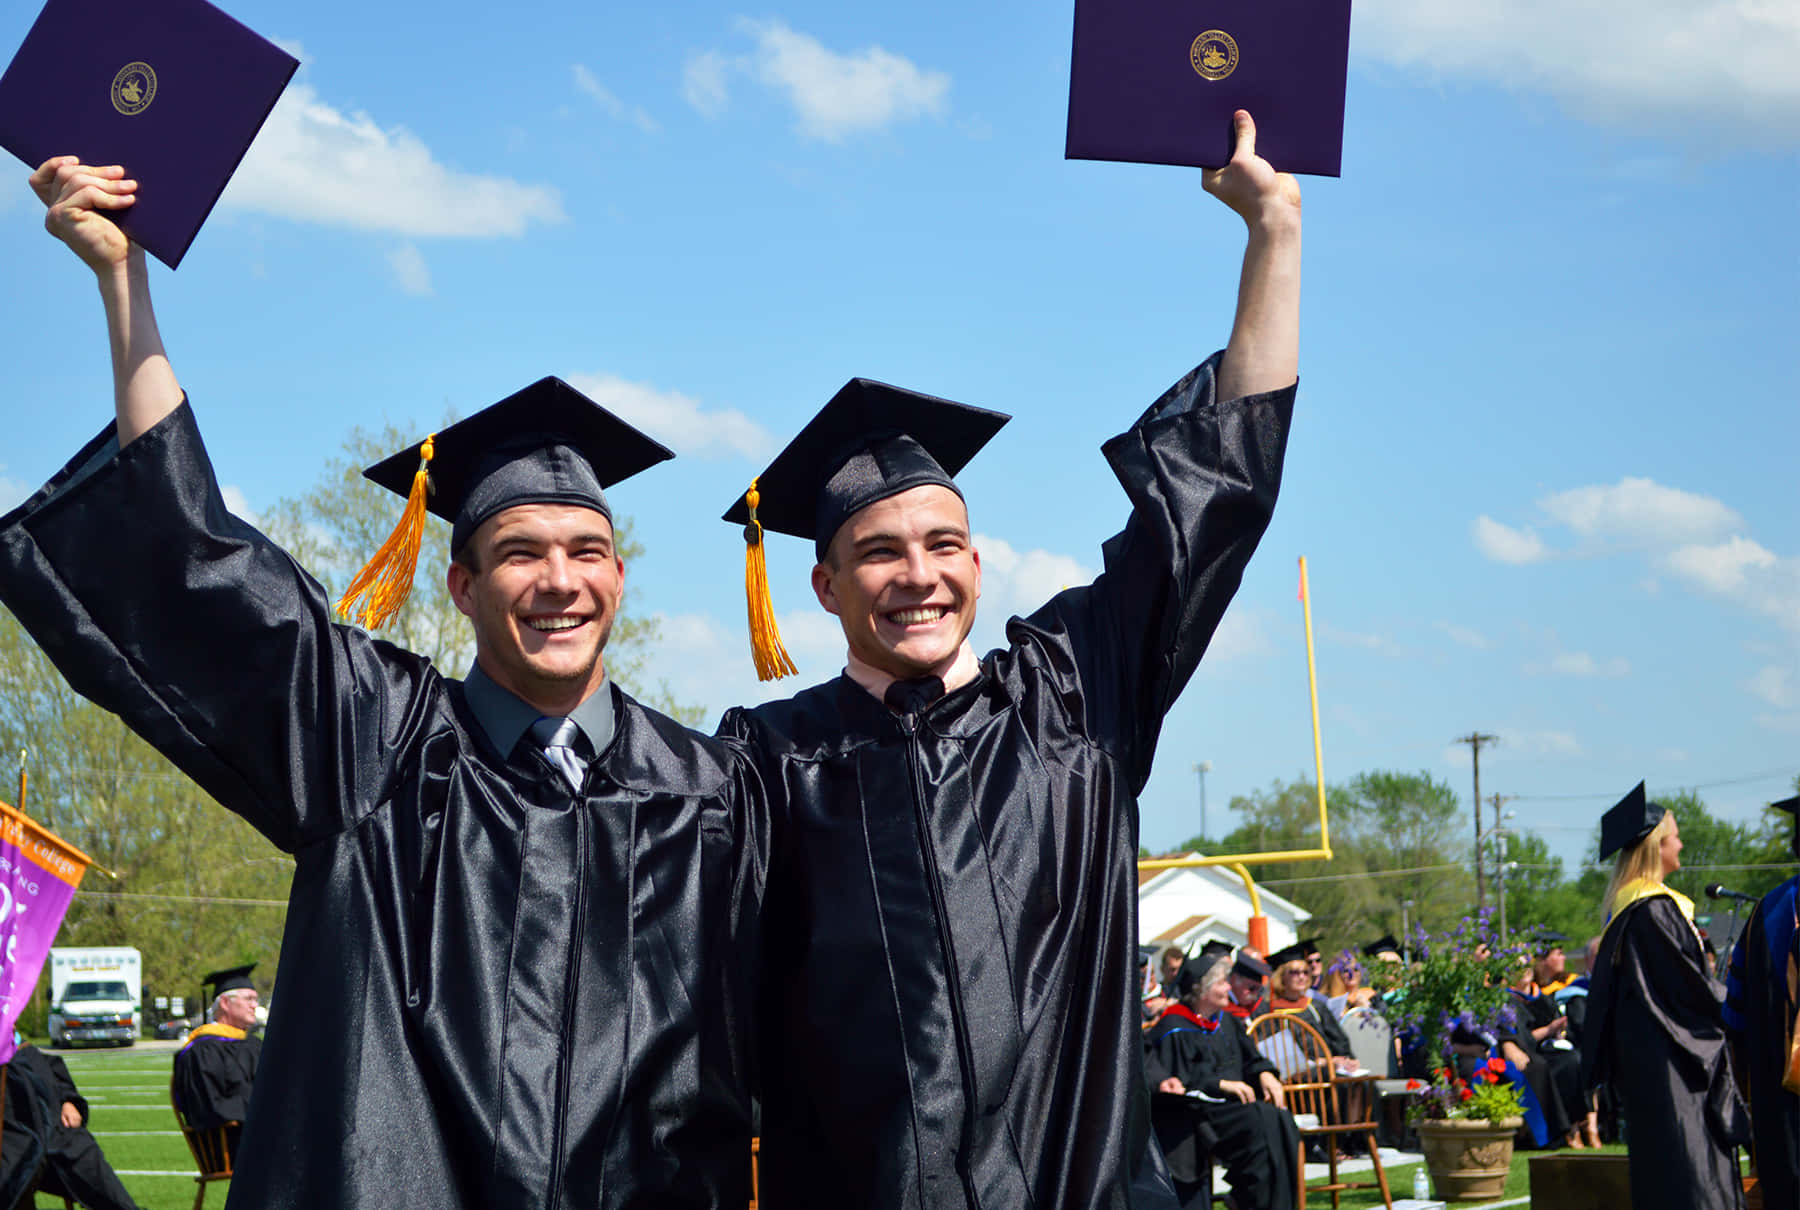 Two Men In Graduation Gowns